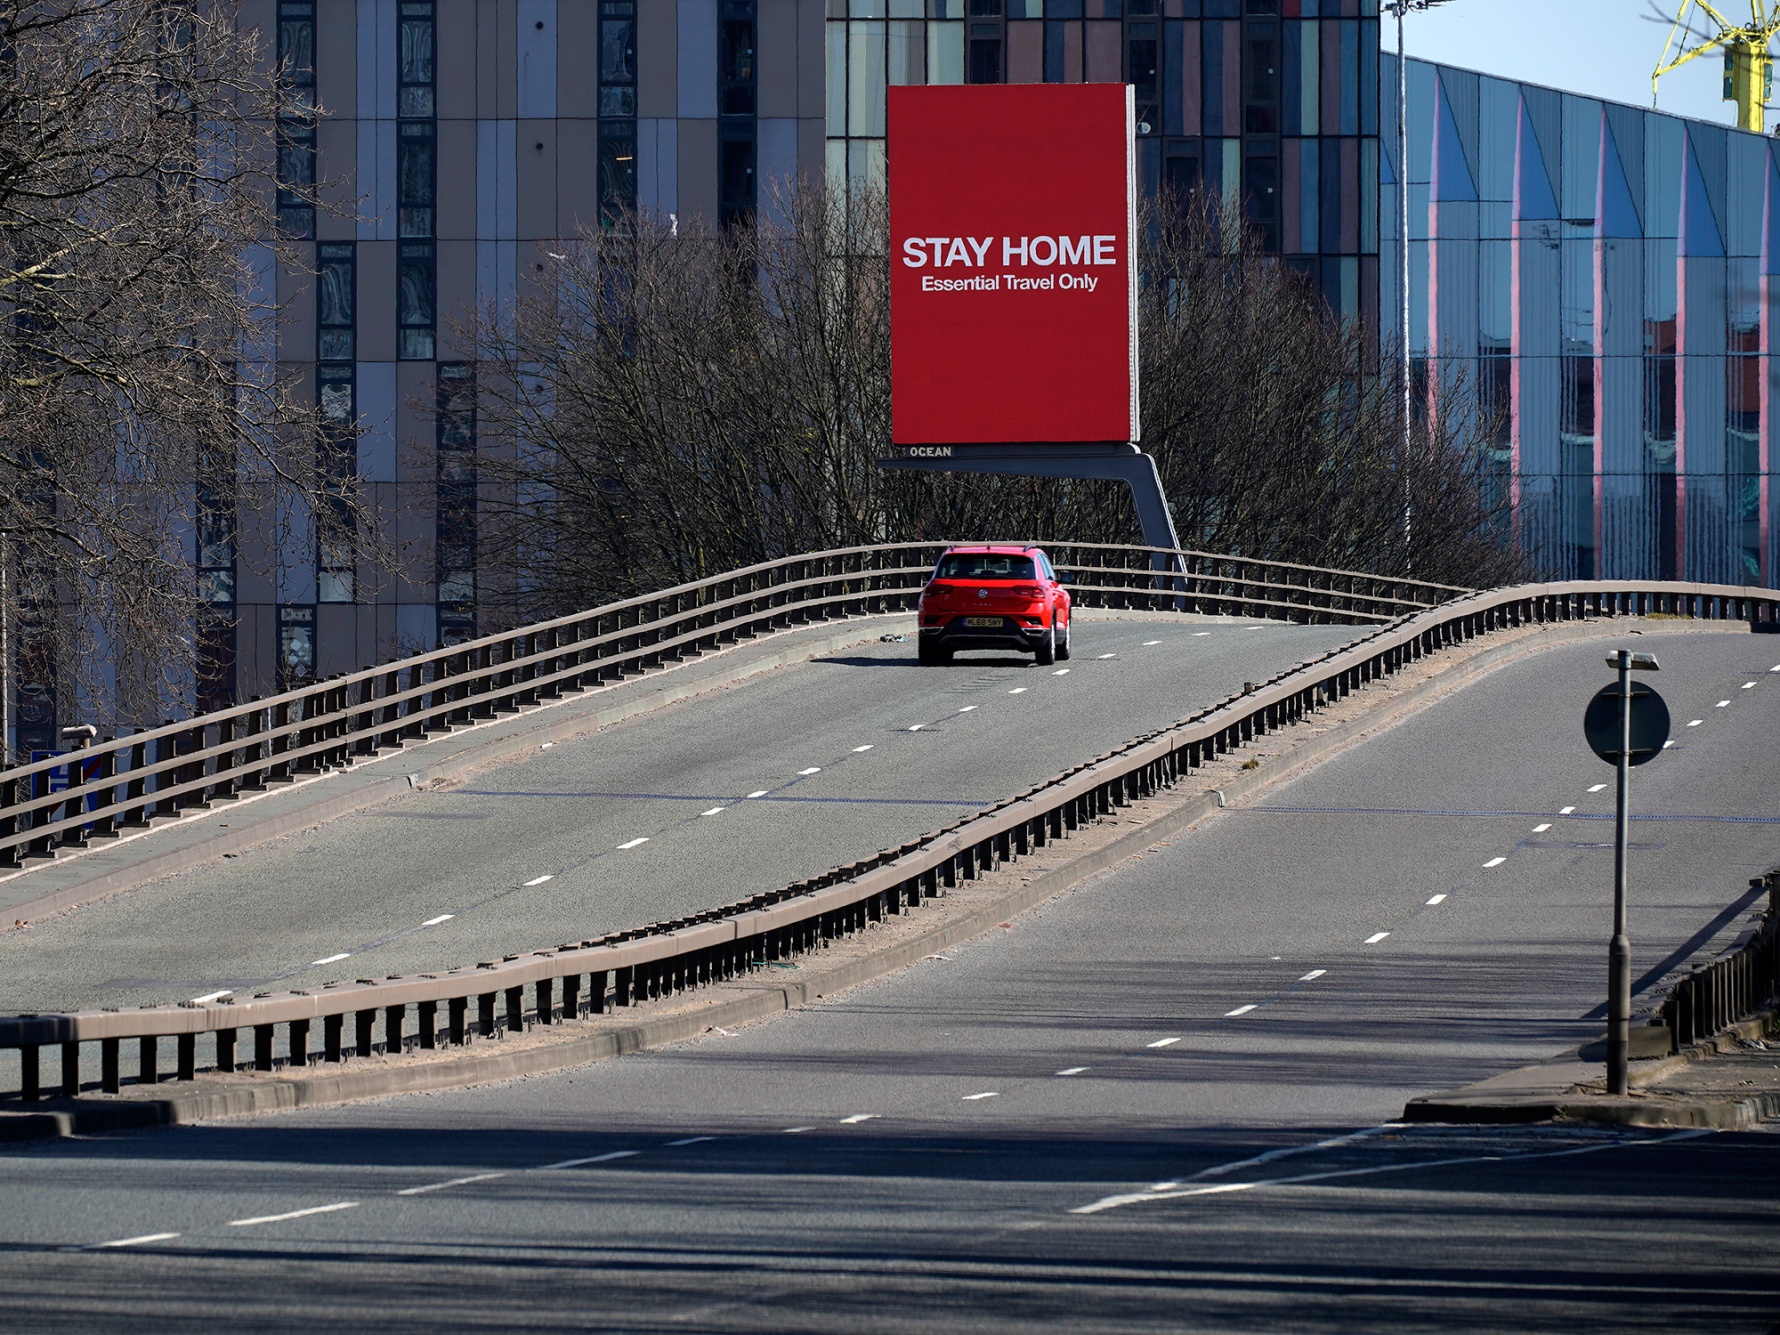 A screen overlooking a main road urges people to stay home, in Manchester U.K., on March 26.